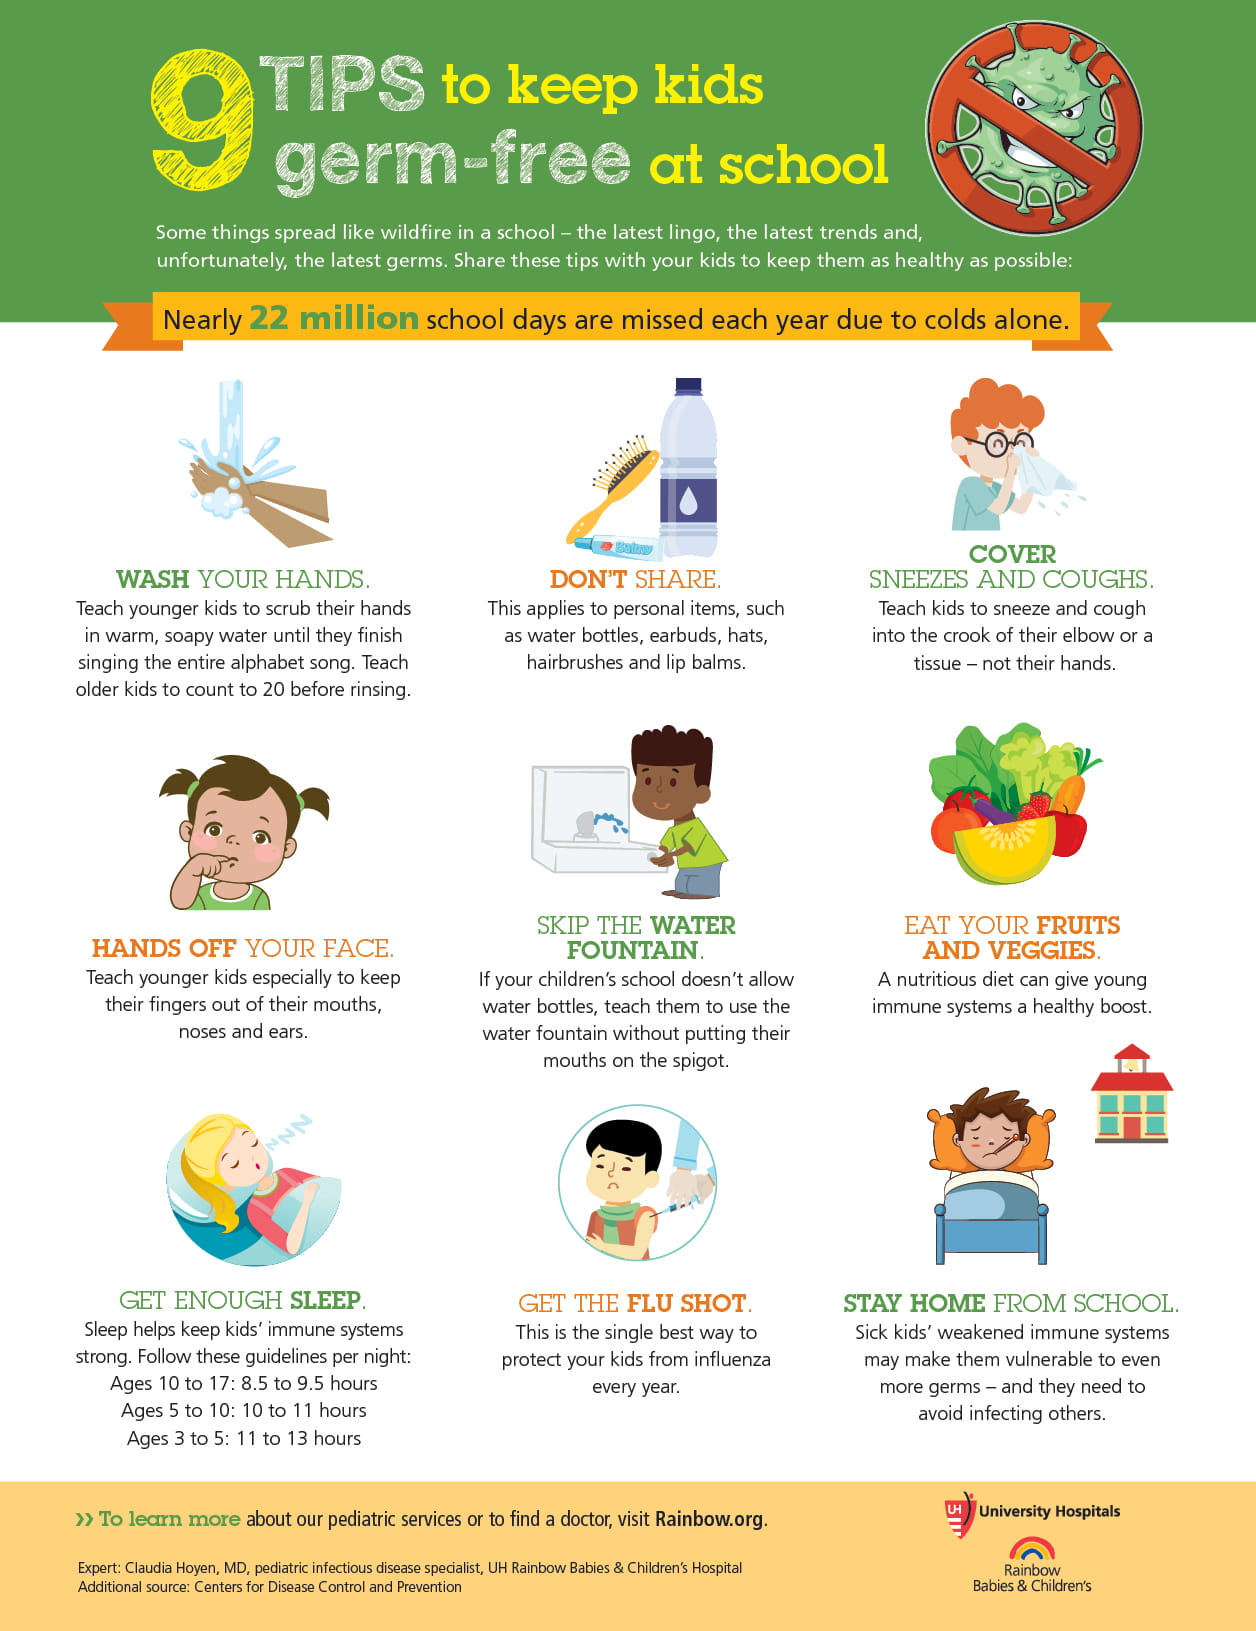 Infographic: 9 Tips to Keep Kids Germ-Free at School